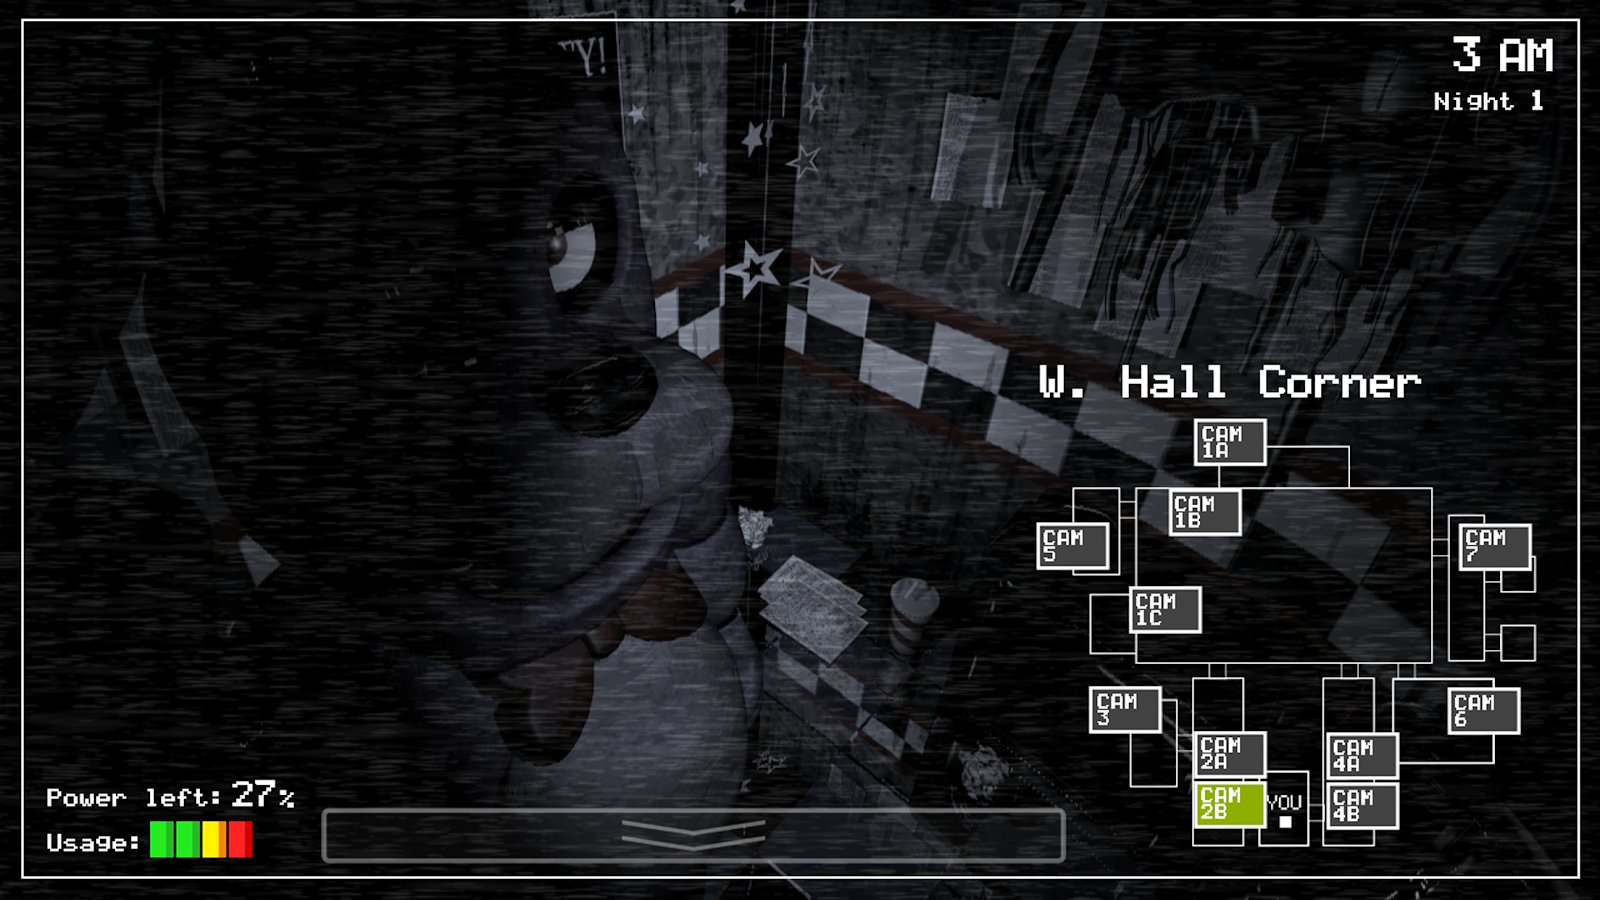 Download Five Nights at Freddy's 2 (Unlocked) 2.0.4.mod APK For Android